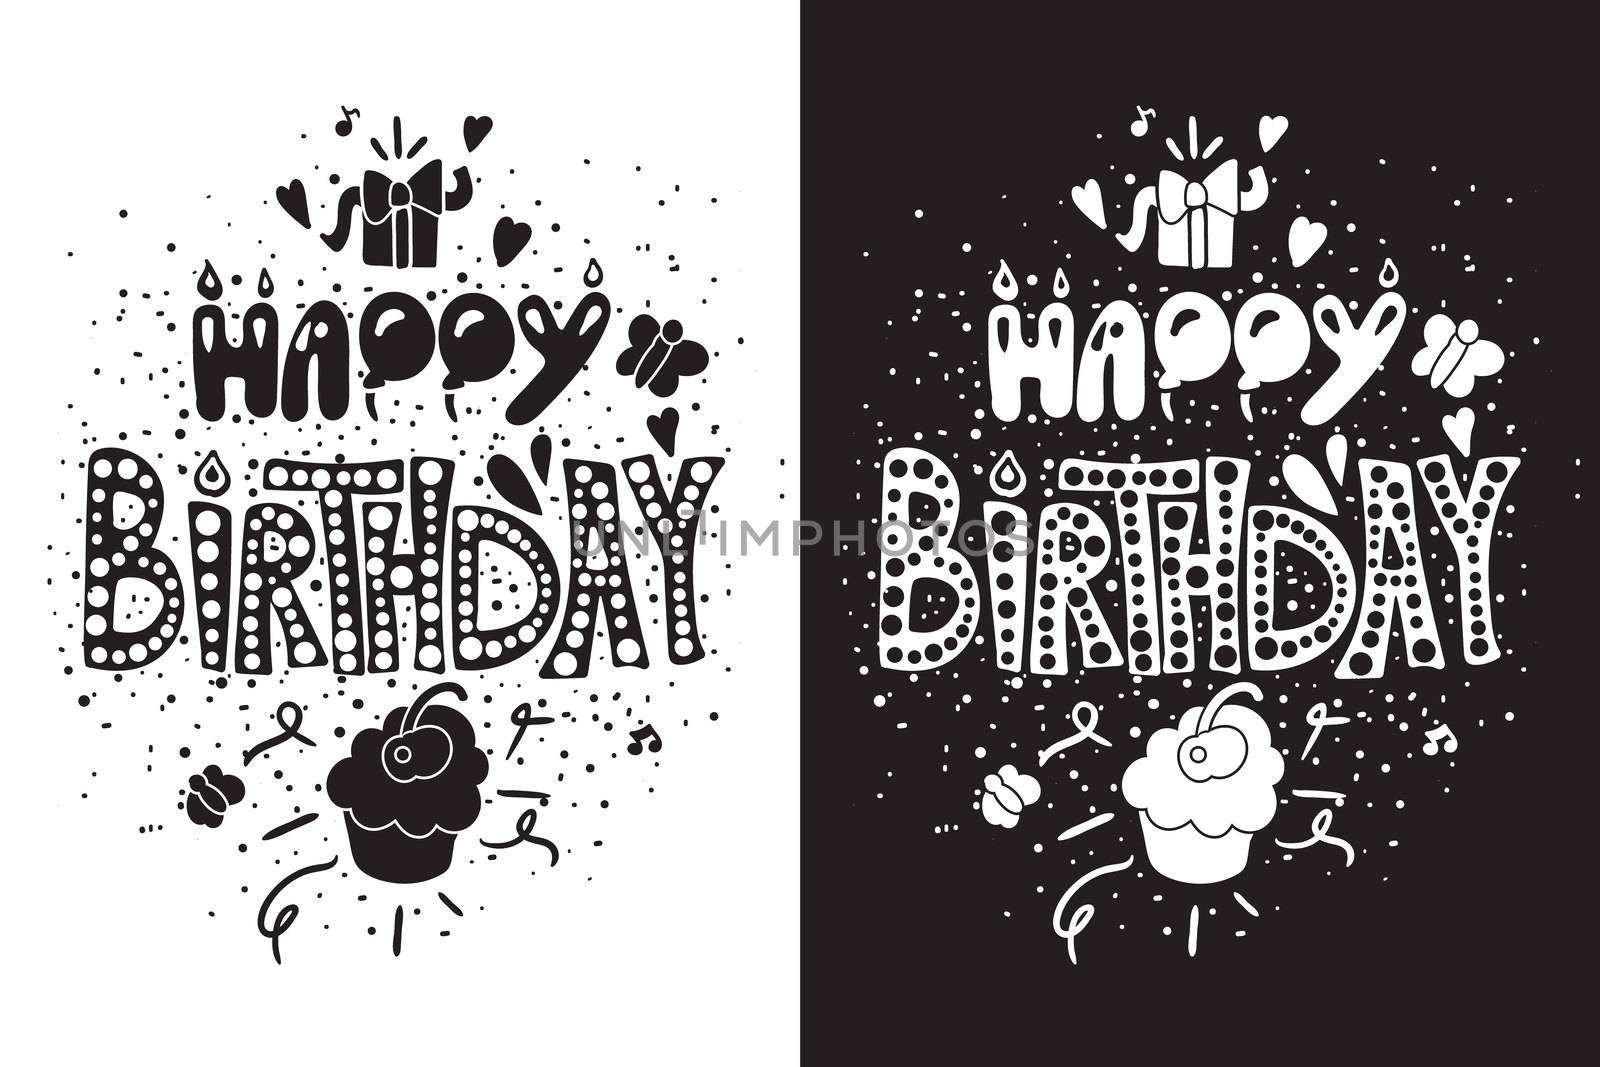 Happy Birthday Greeting Card in black white themes with gift and cupcake. Vector illustration